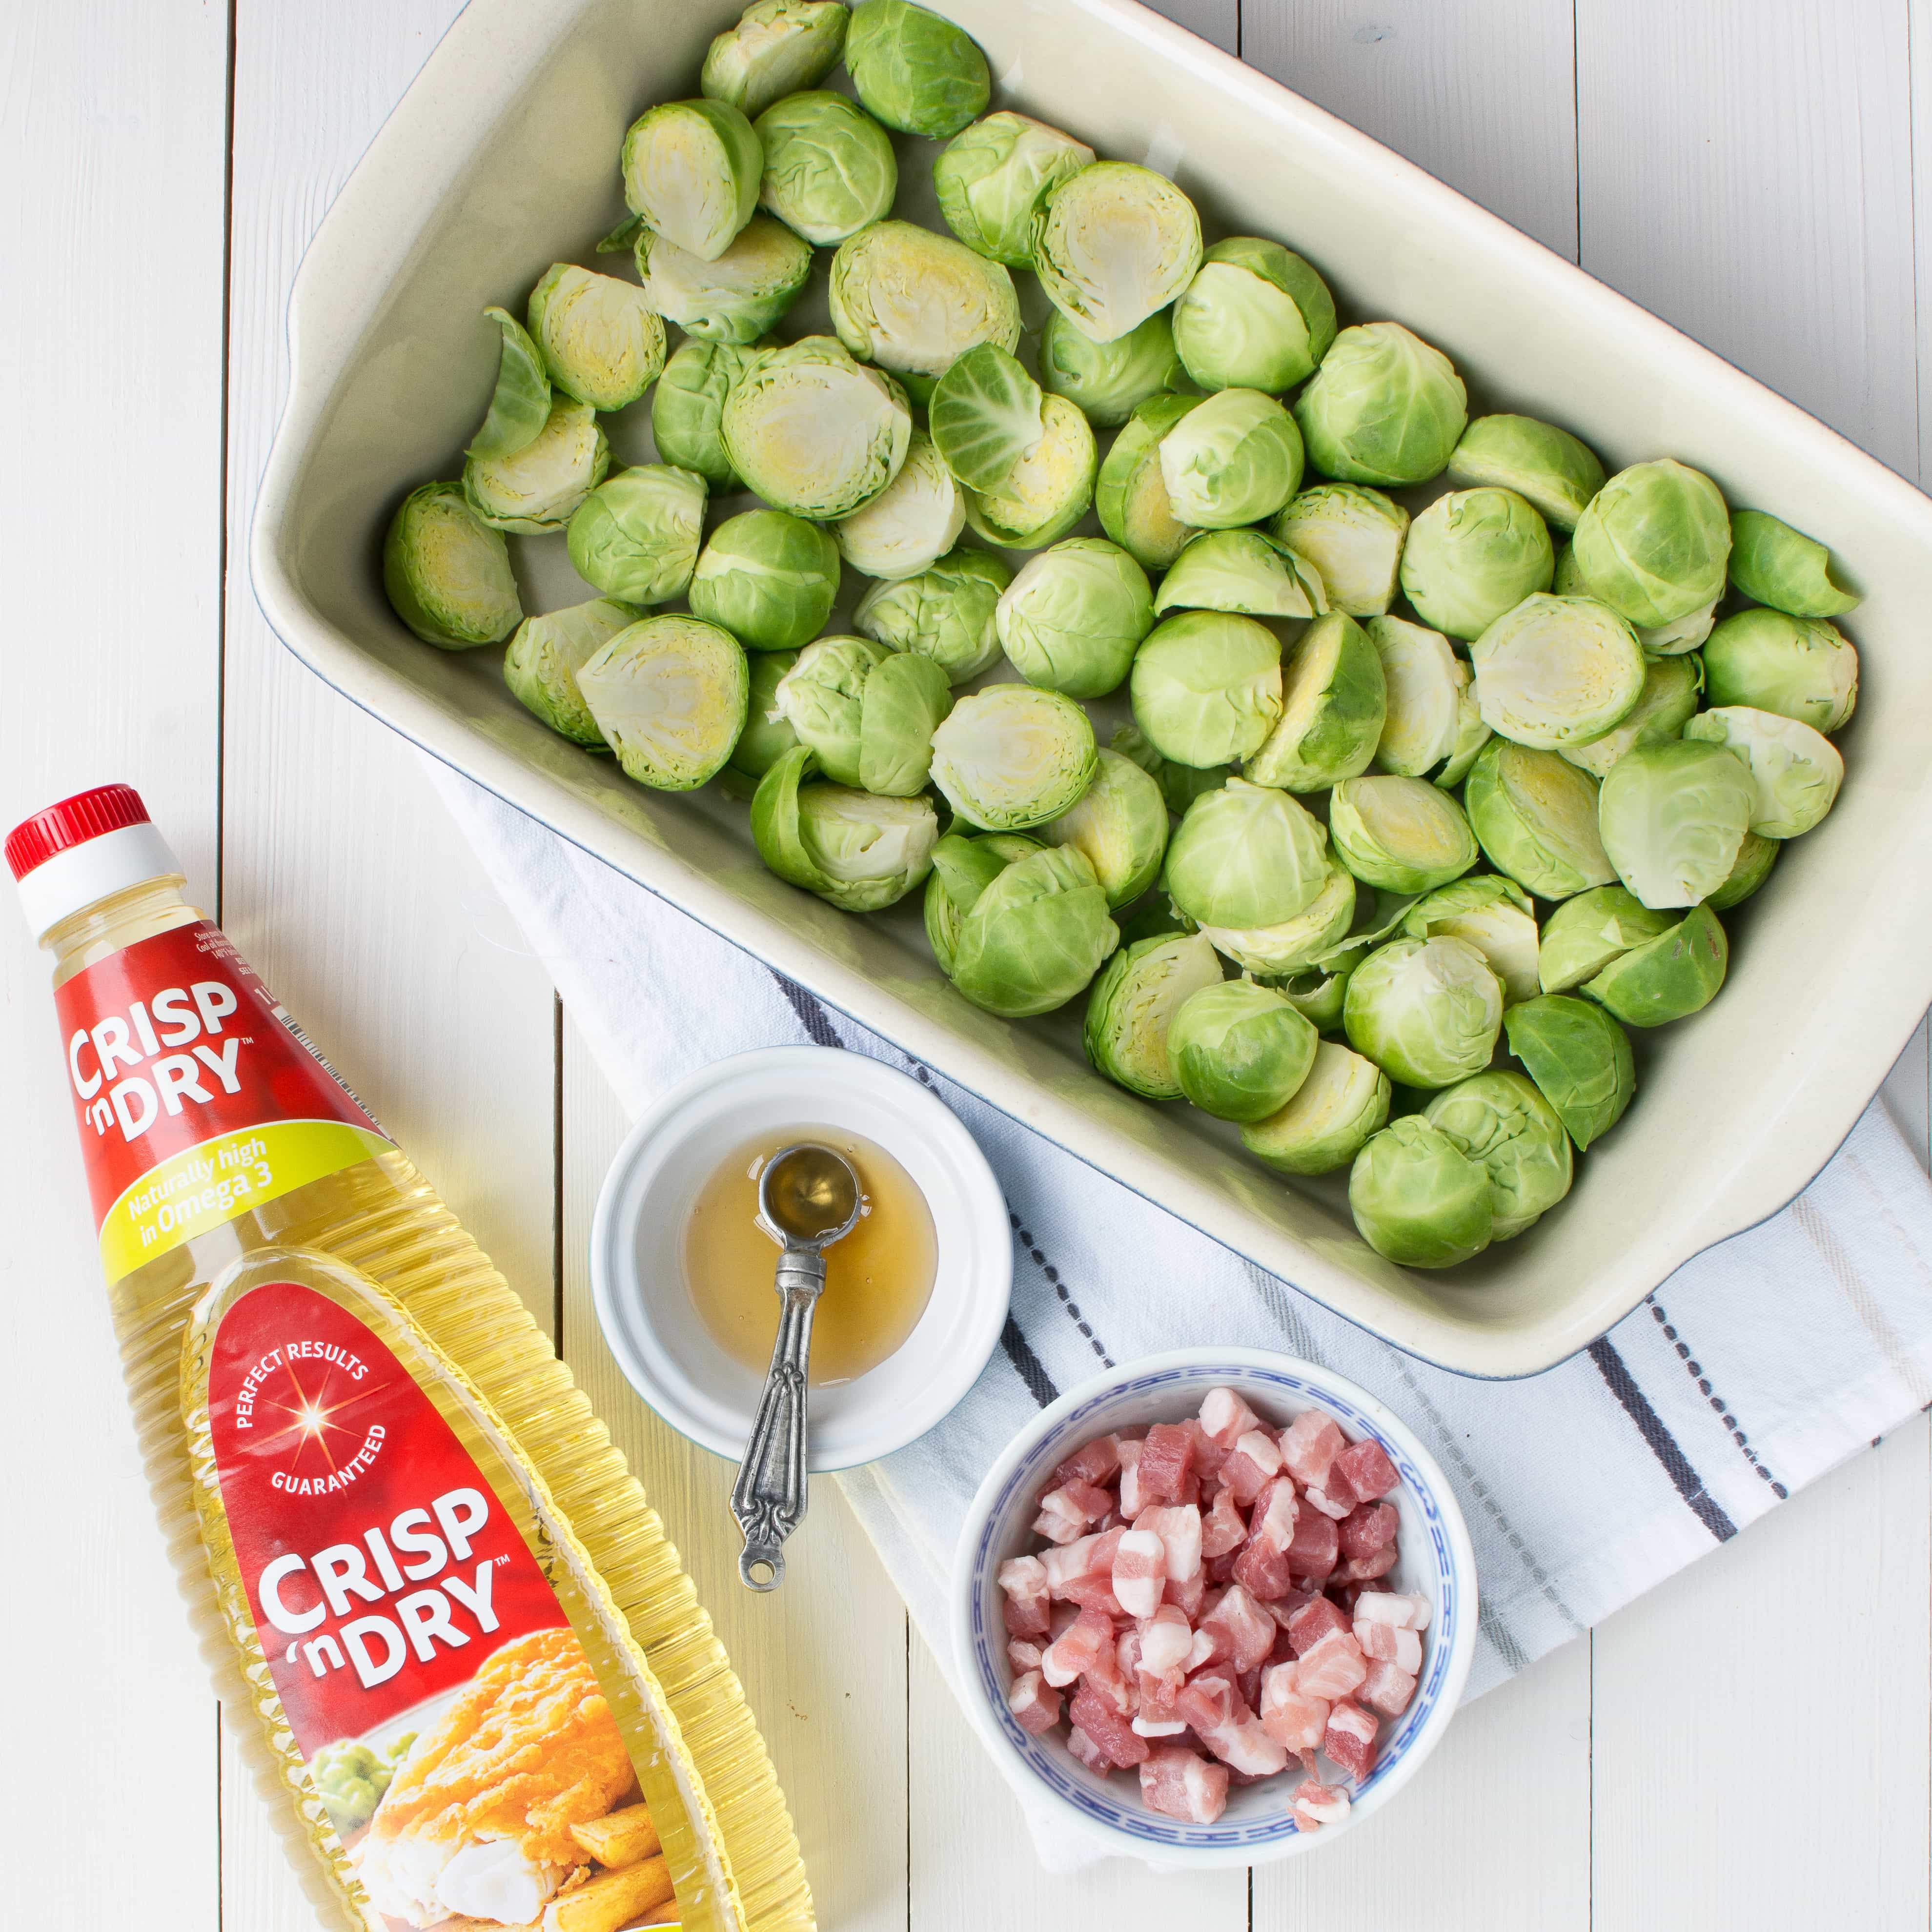 Roasted sprouts with a hint of honey and pancetta. The perfect accompaniment to your Christmas dinner. Plus my top tips for making Christmas day cooking stress free.